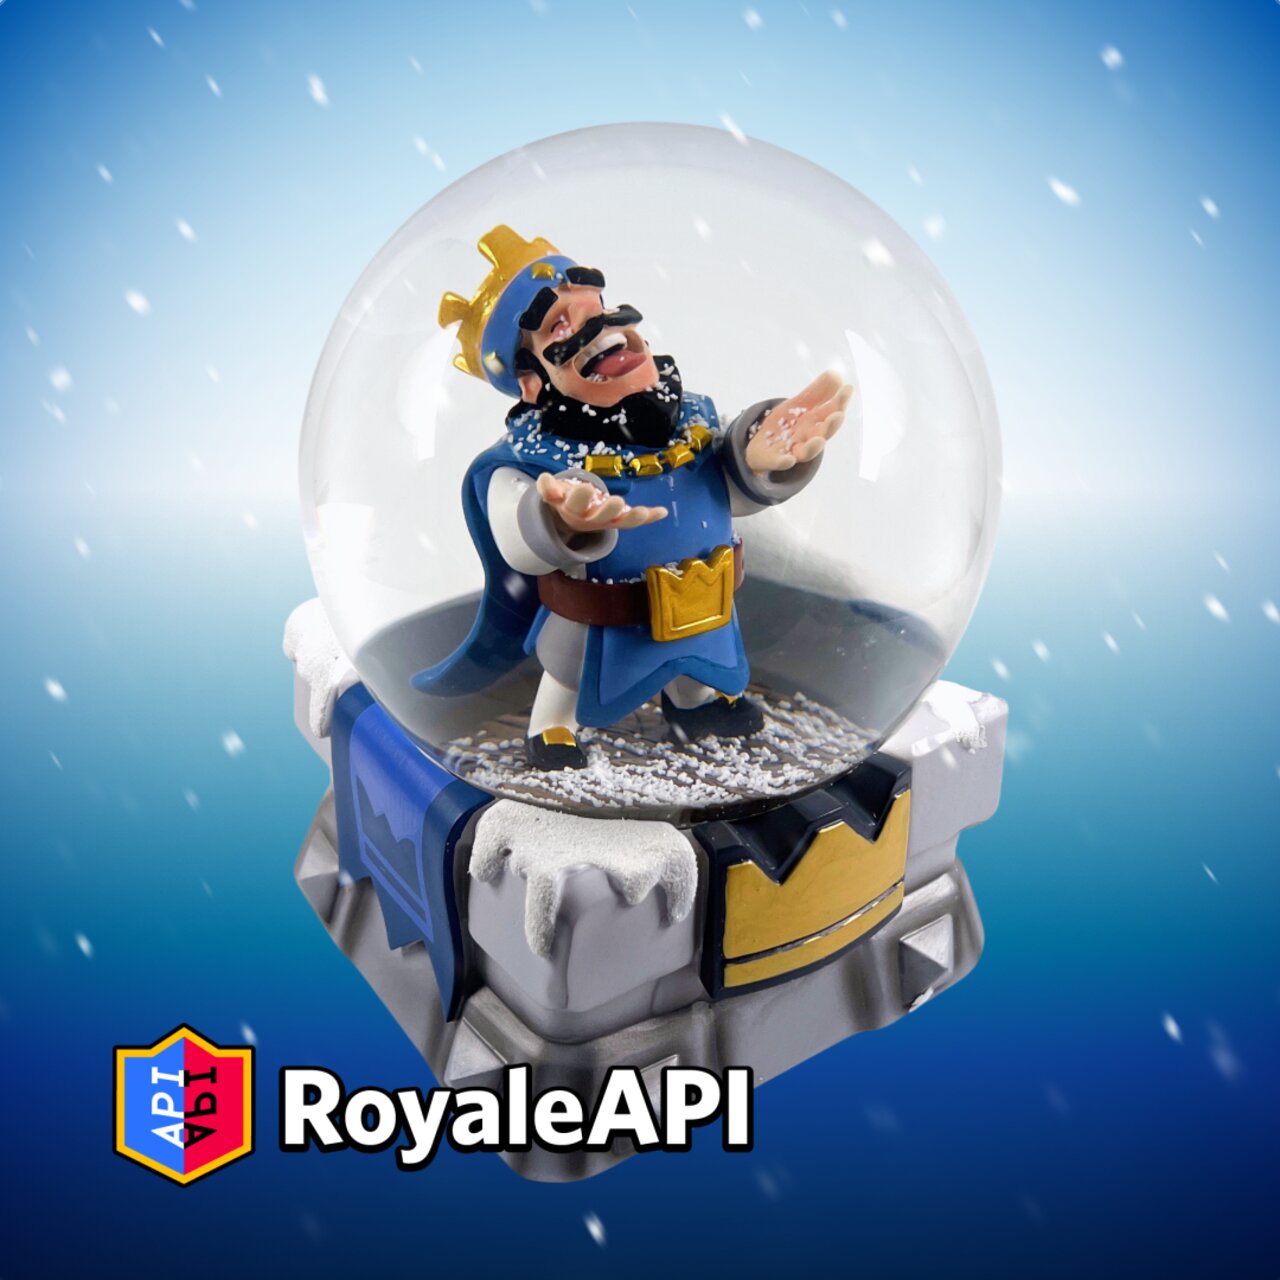 Royale API - むぎったん Mugi is currently global number 1 on